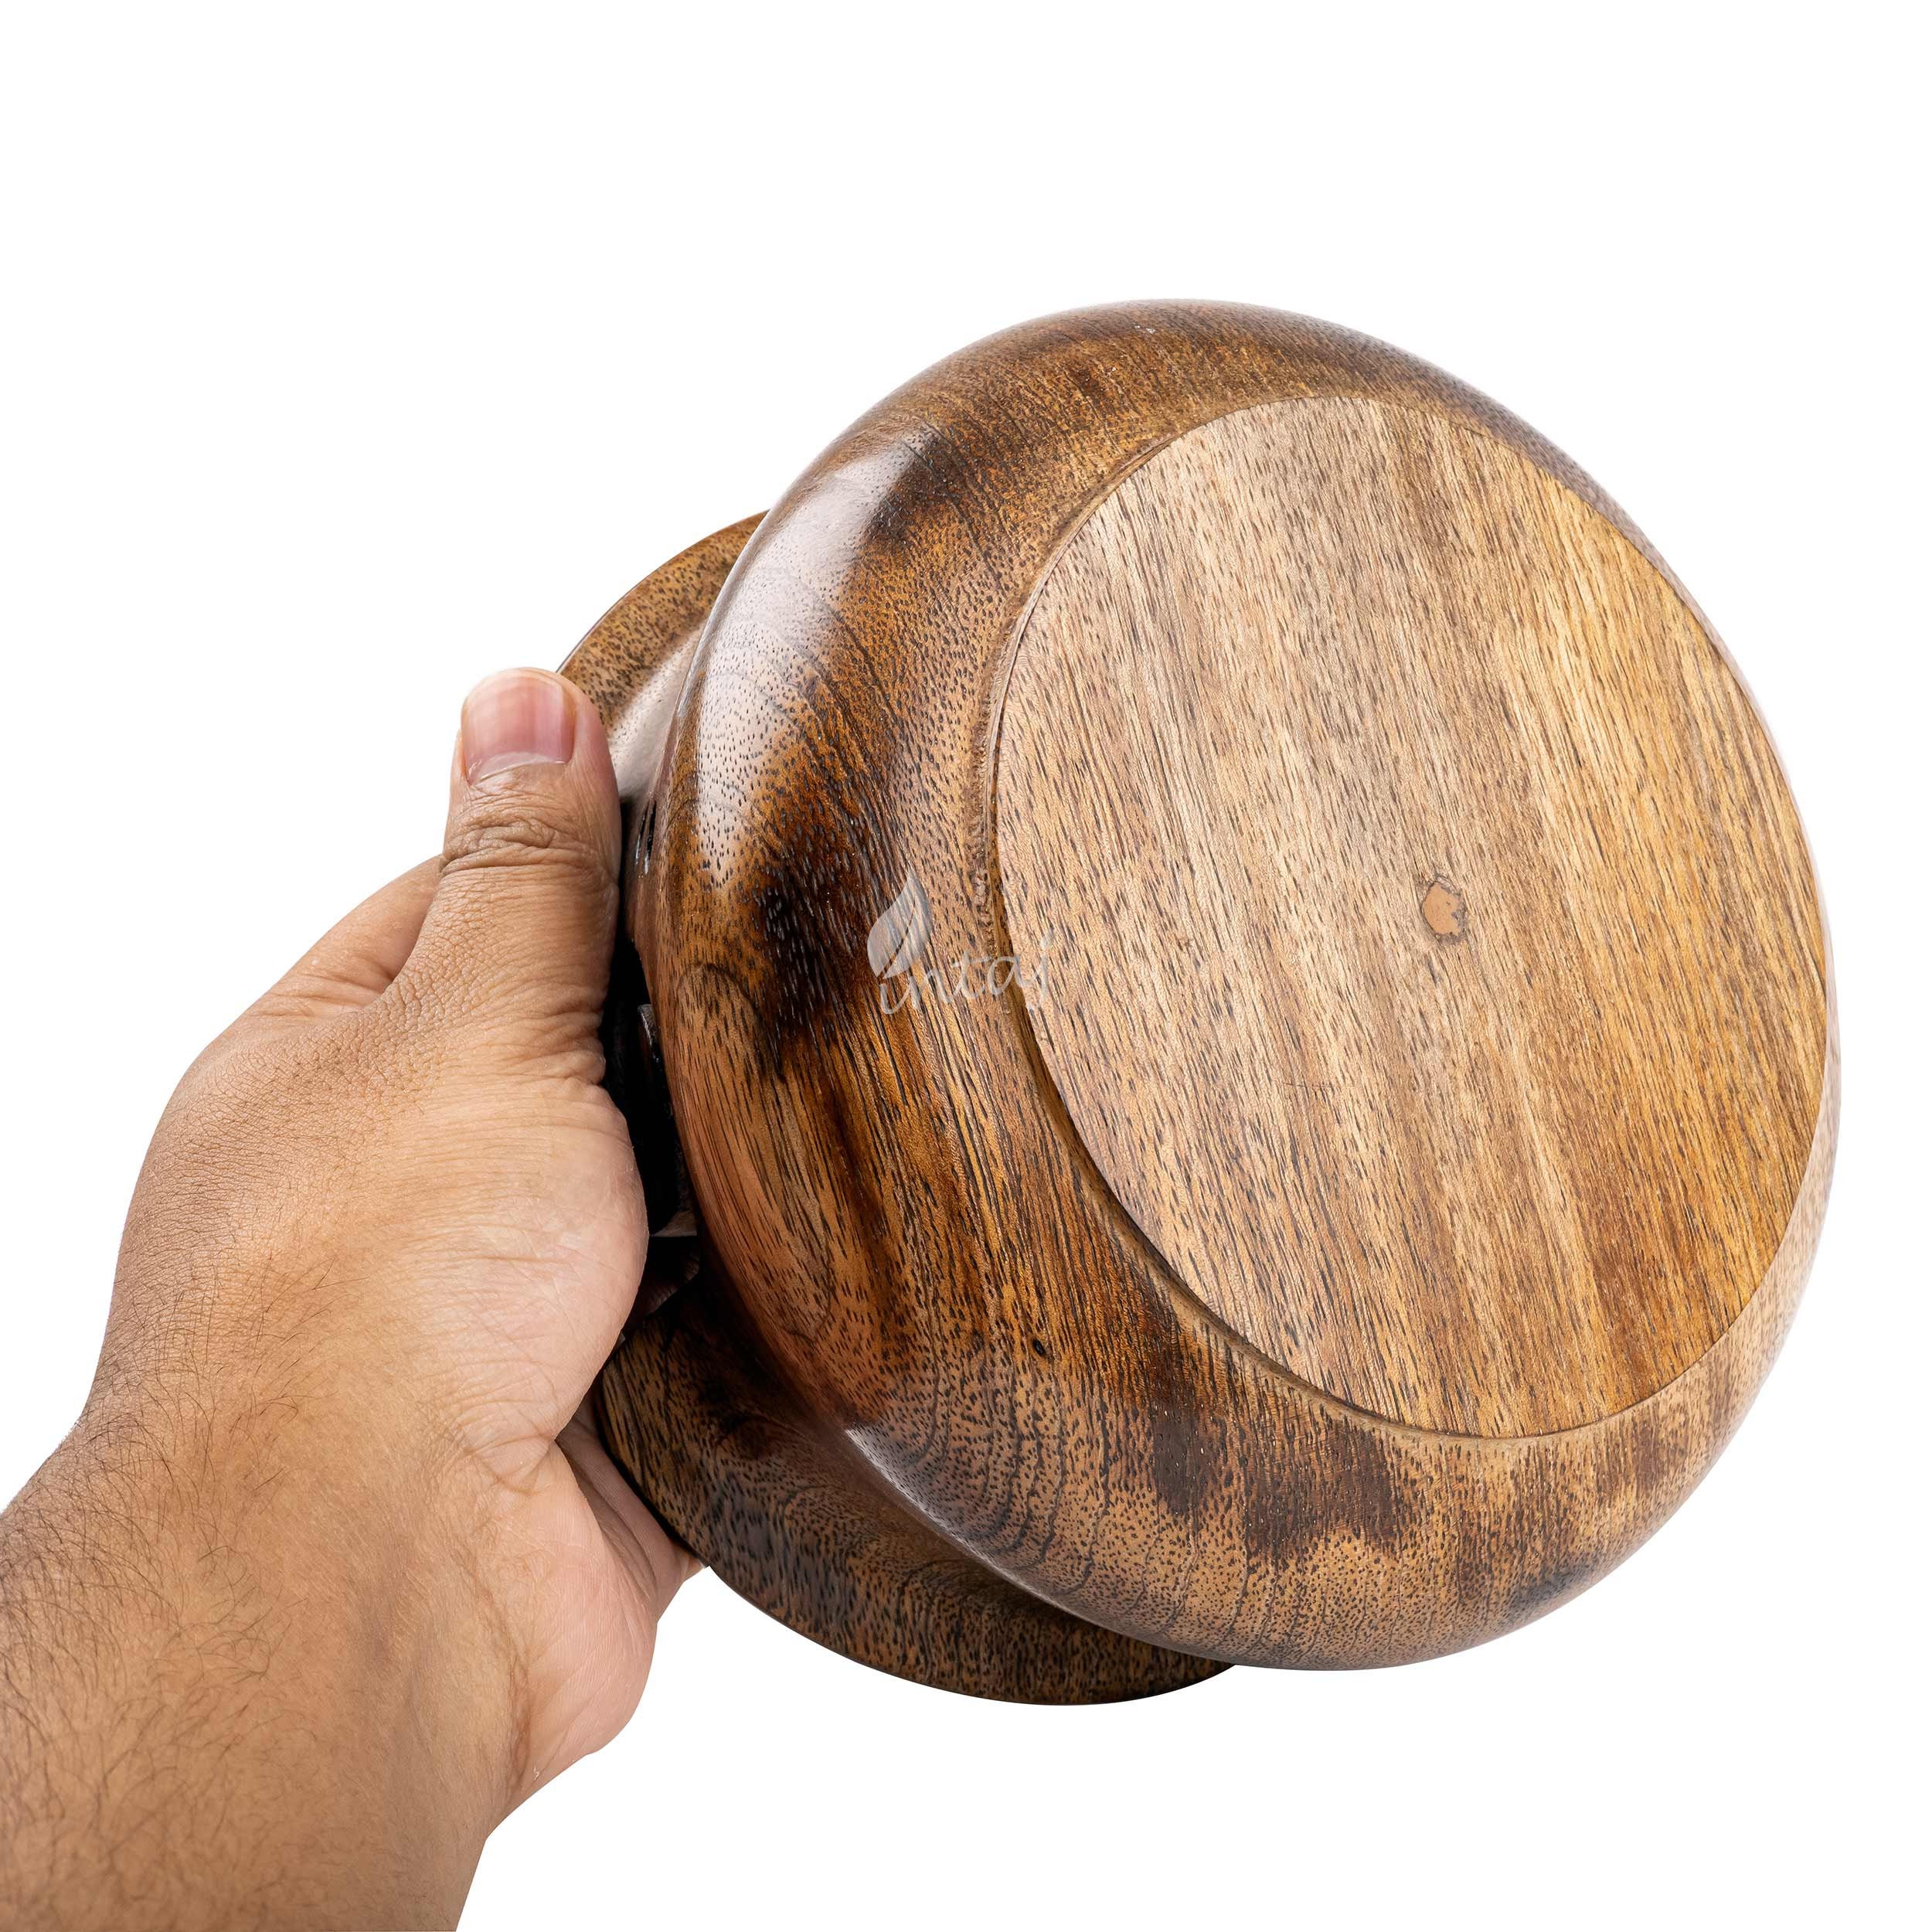 Premium Handcrafted Rosewood Yarn Bowls for Knitting, Crochet, Sewing —  Revolution Fibers